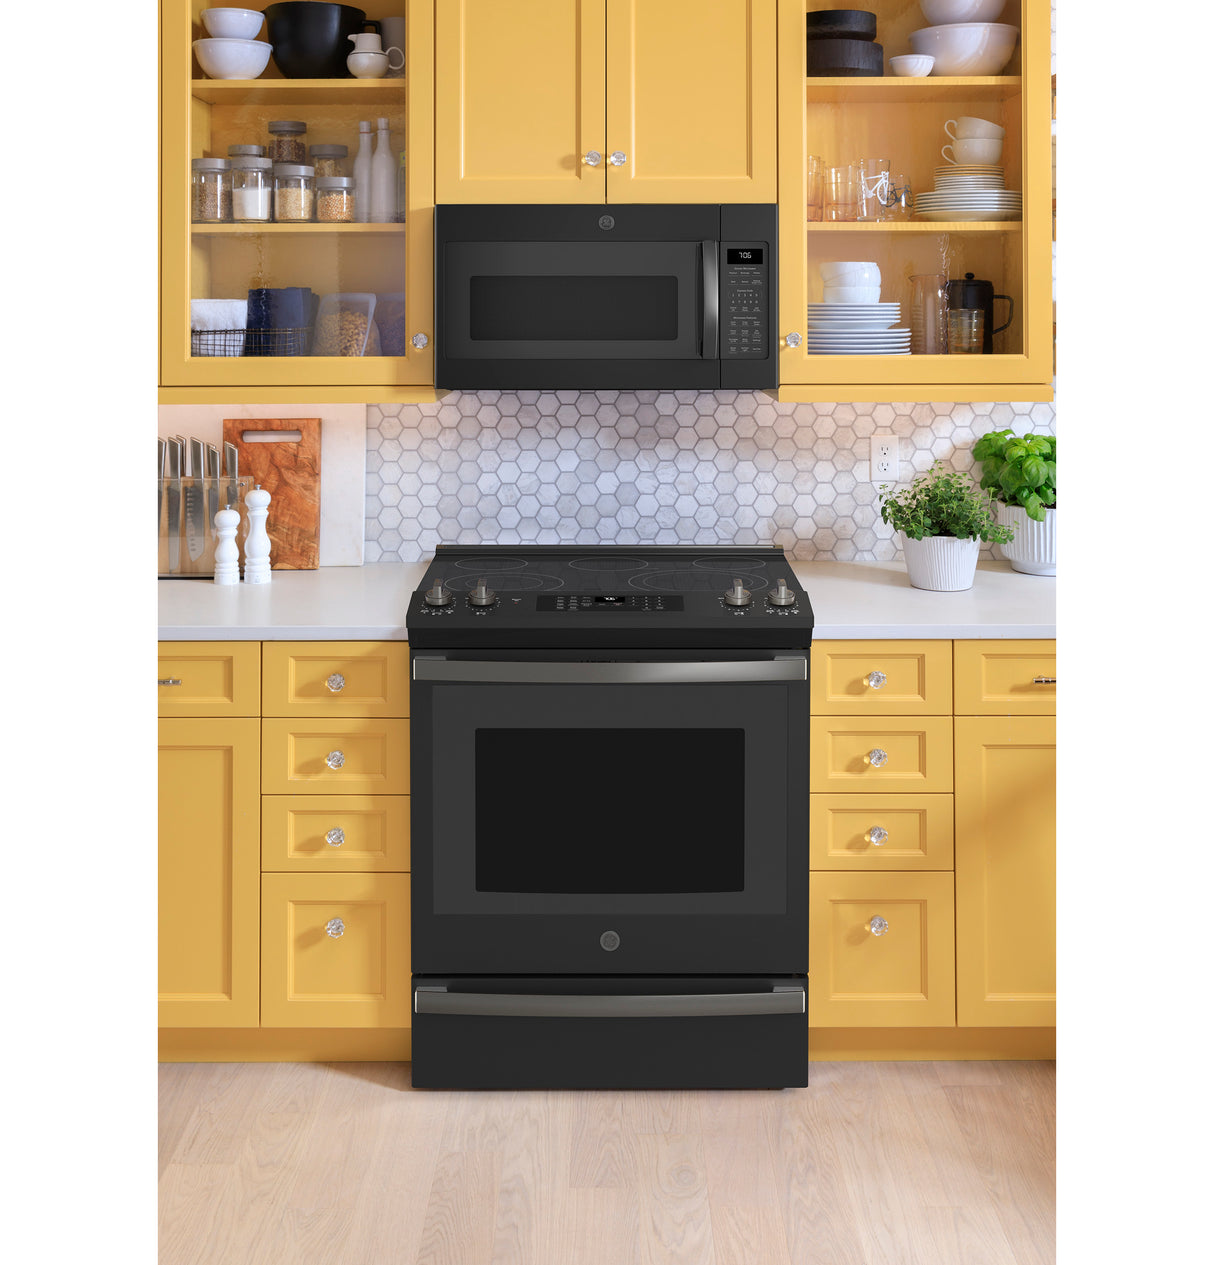 GE(R) 30" Slide-In Electric Convection Range with No Preheat Air Fry - (JS760FPDS)